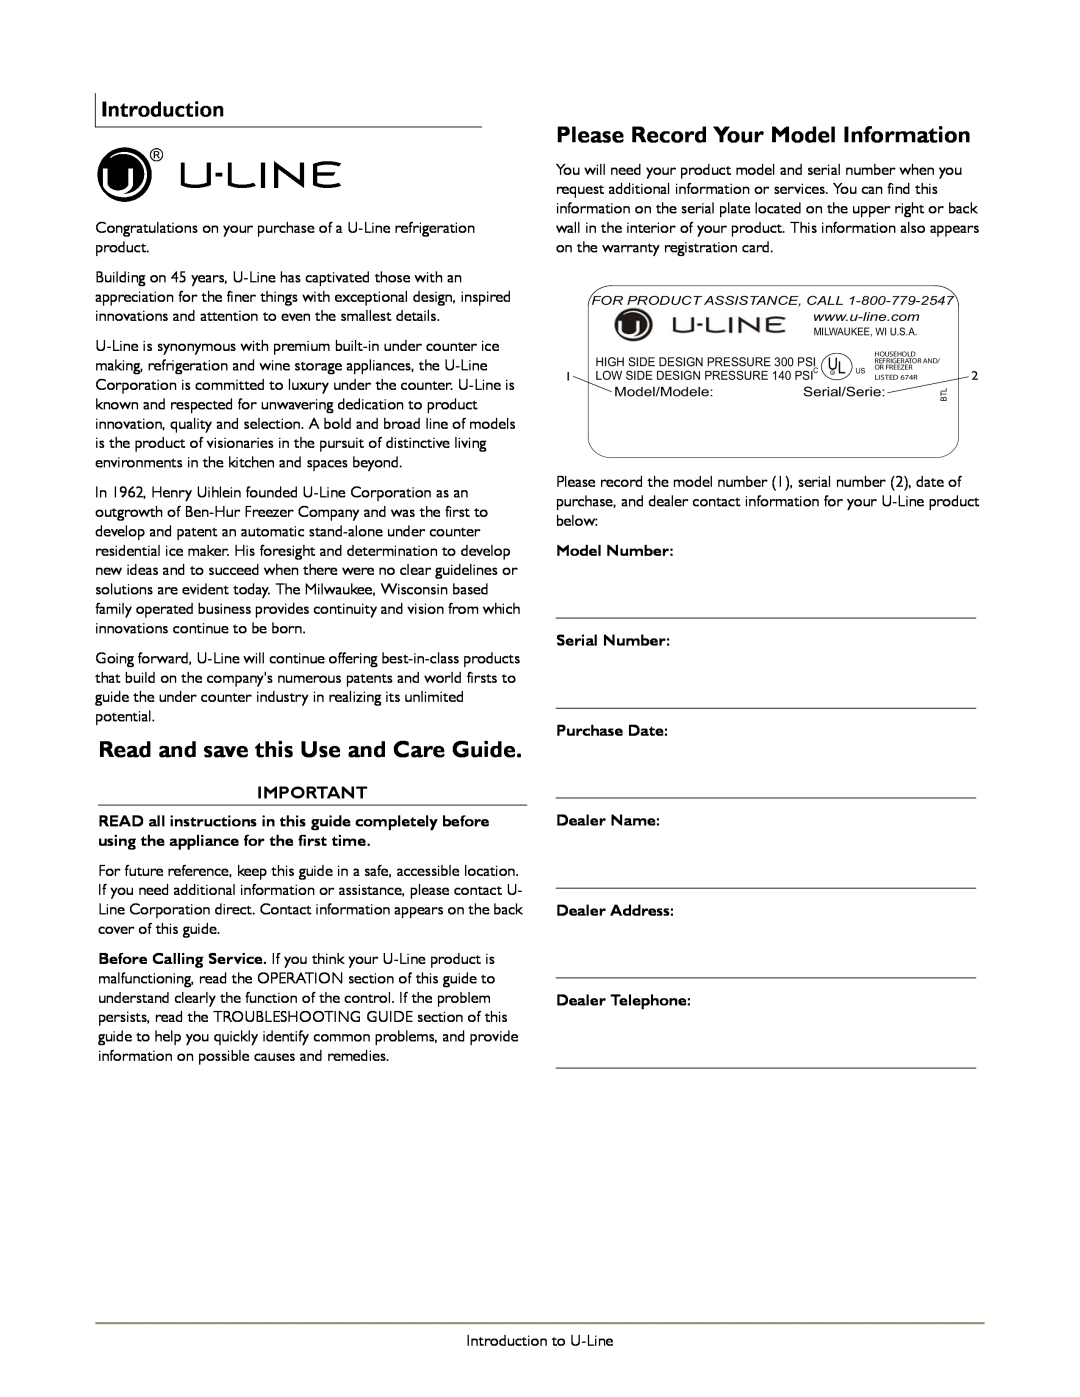 U-Line CO1175, SP18 manual Read and save this Use and Care Guide, Please Record Your Model Information, Introduction 